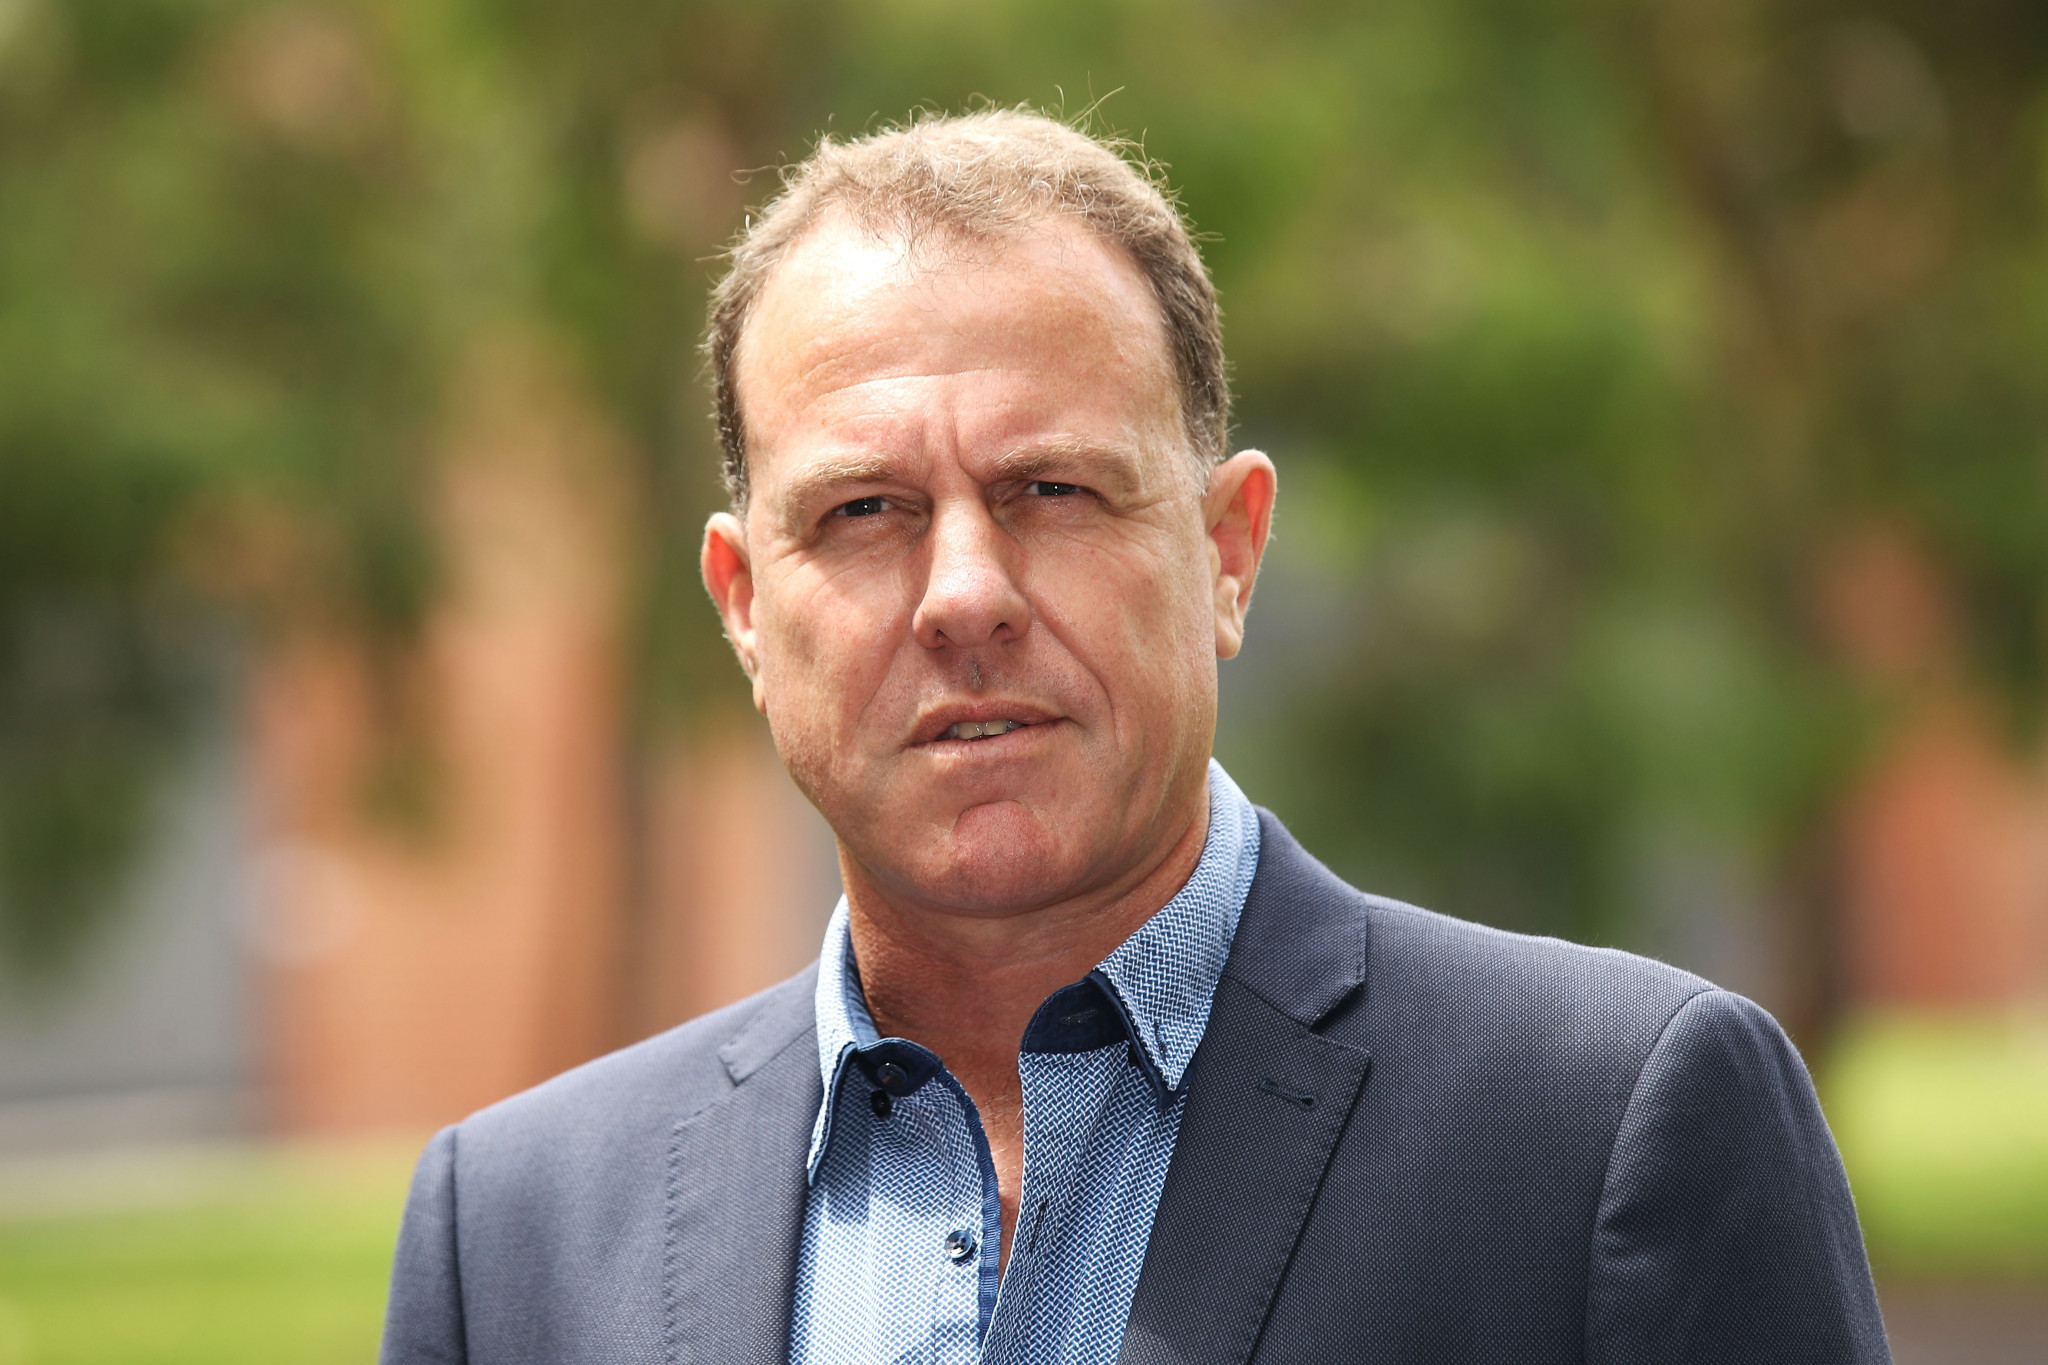 Football Federation Australia confirmed Alen Stajcic had not been dismissed due to misconduct ©Getty Images